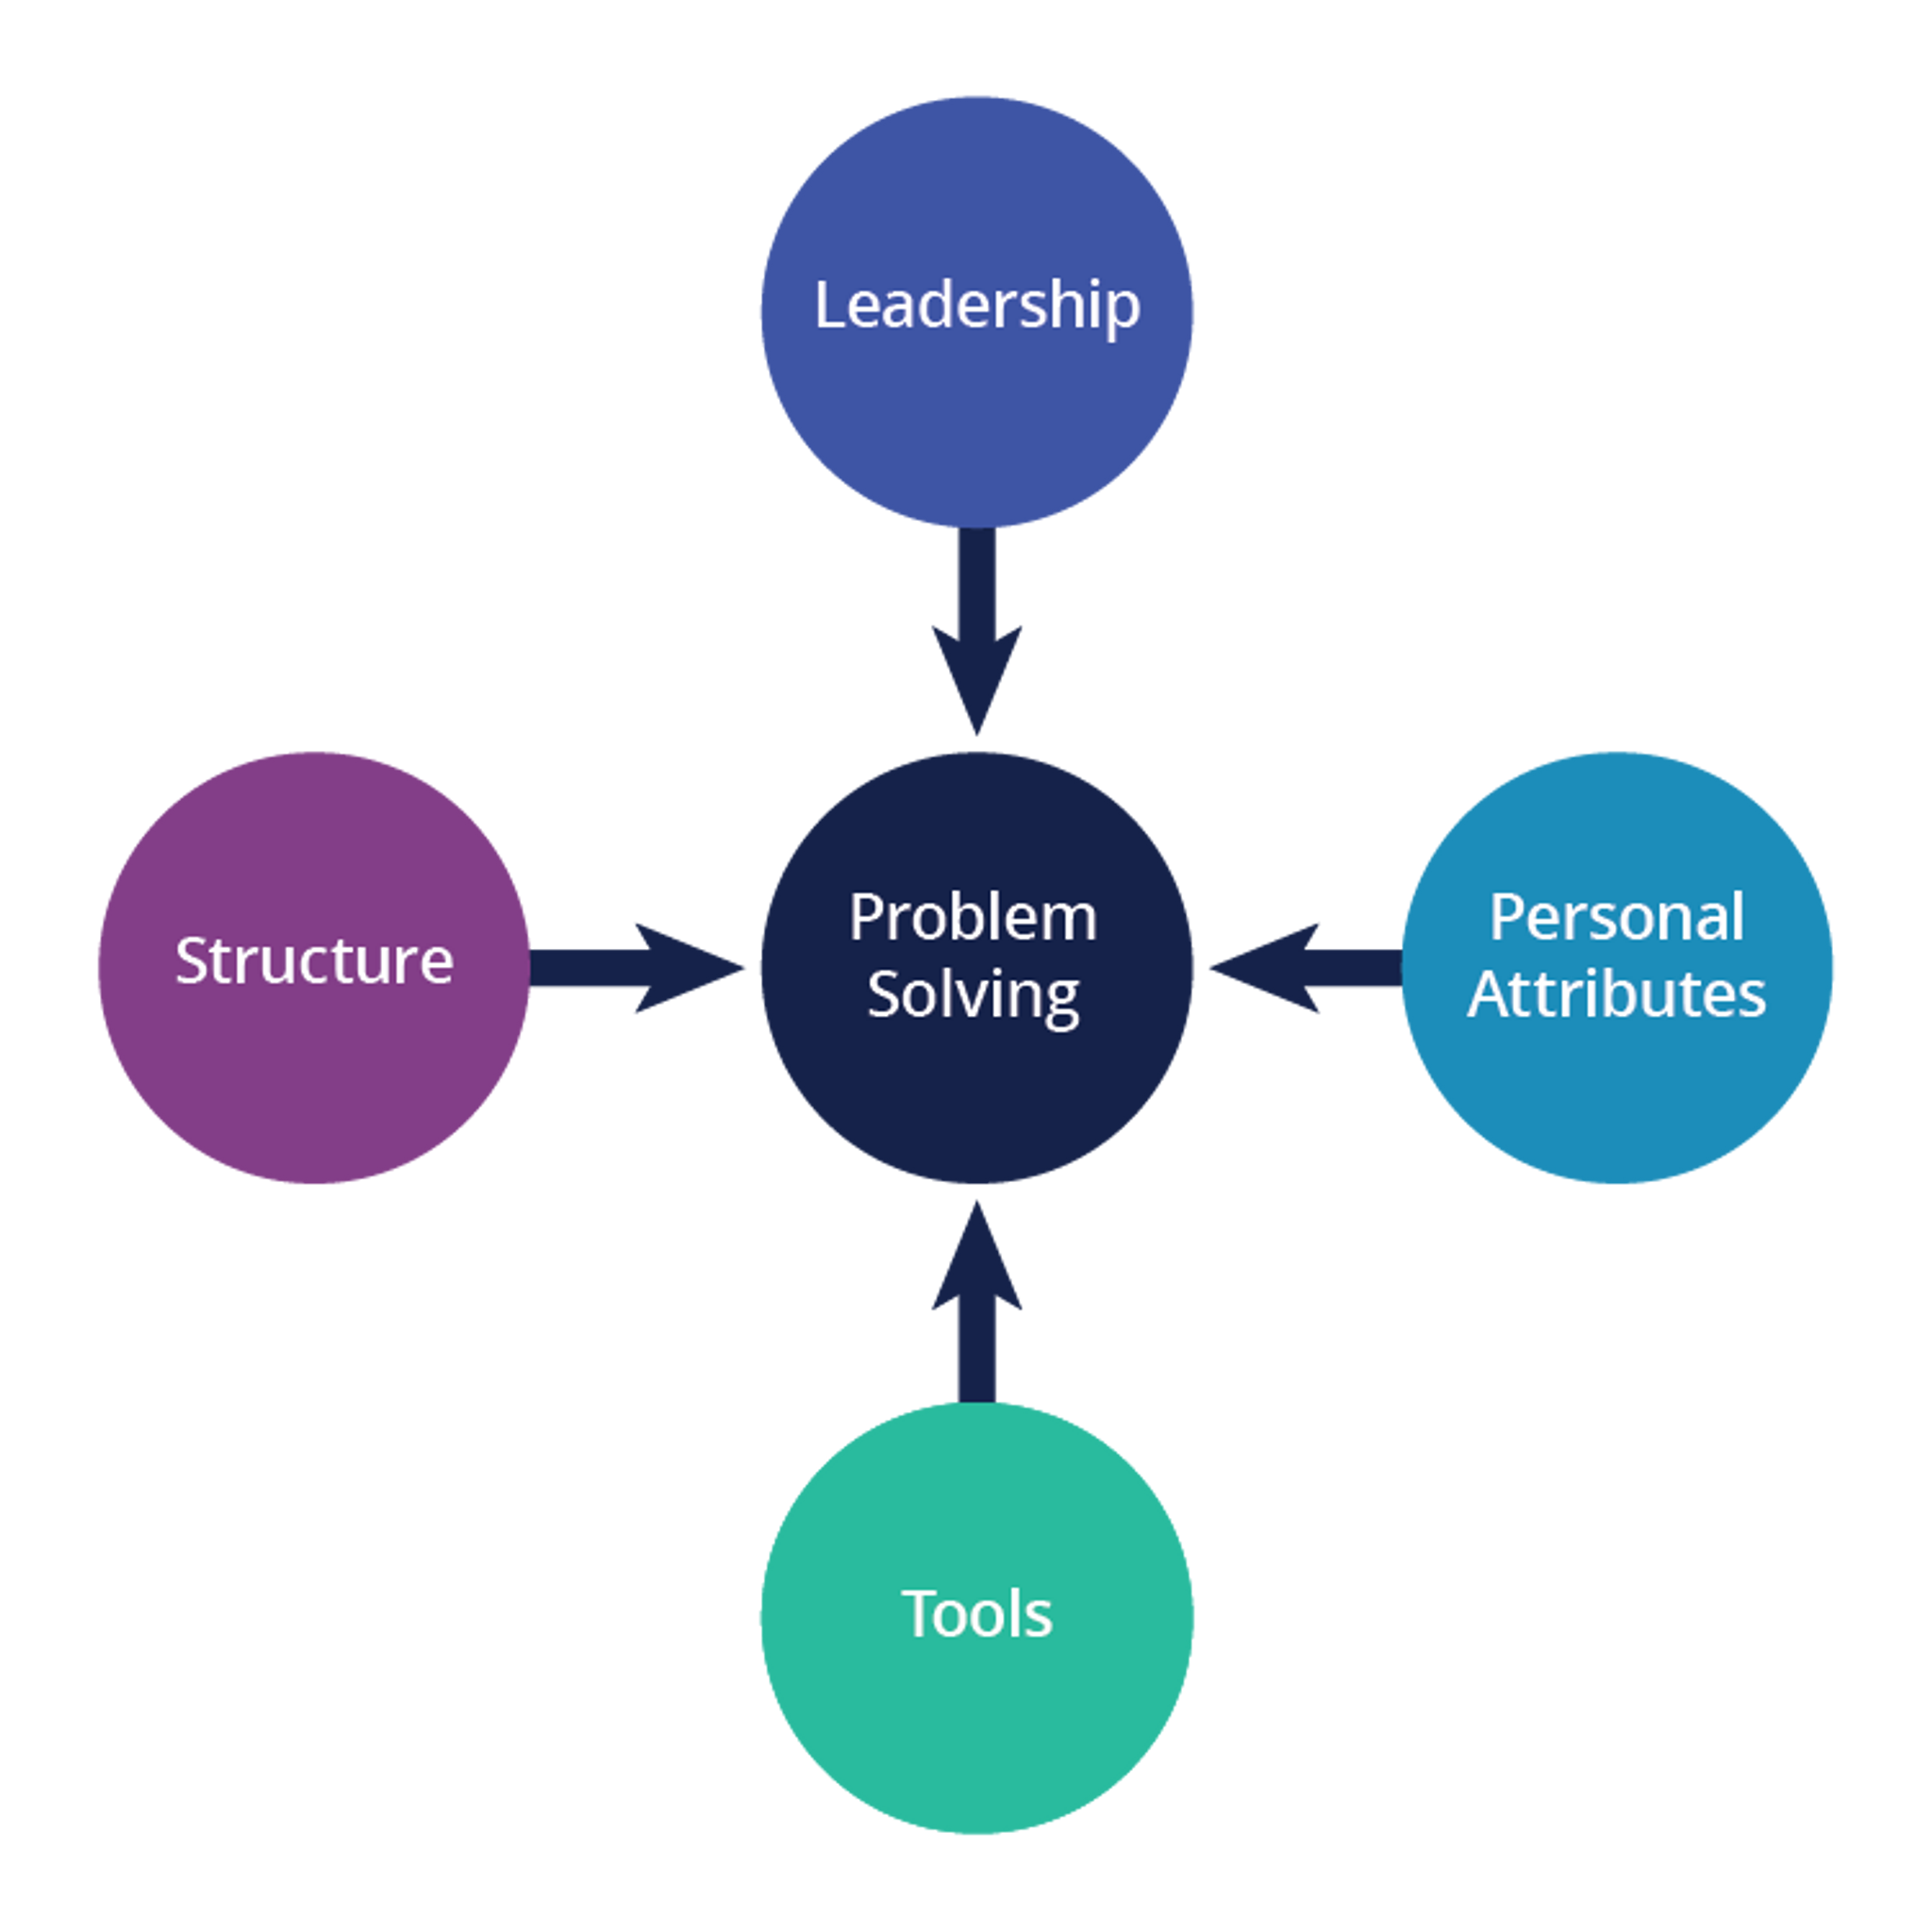 Problem solving map showing leadership, structure, personal attributes, and tools as inputs